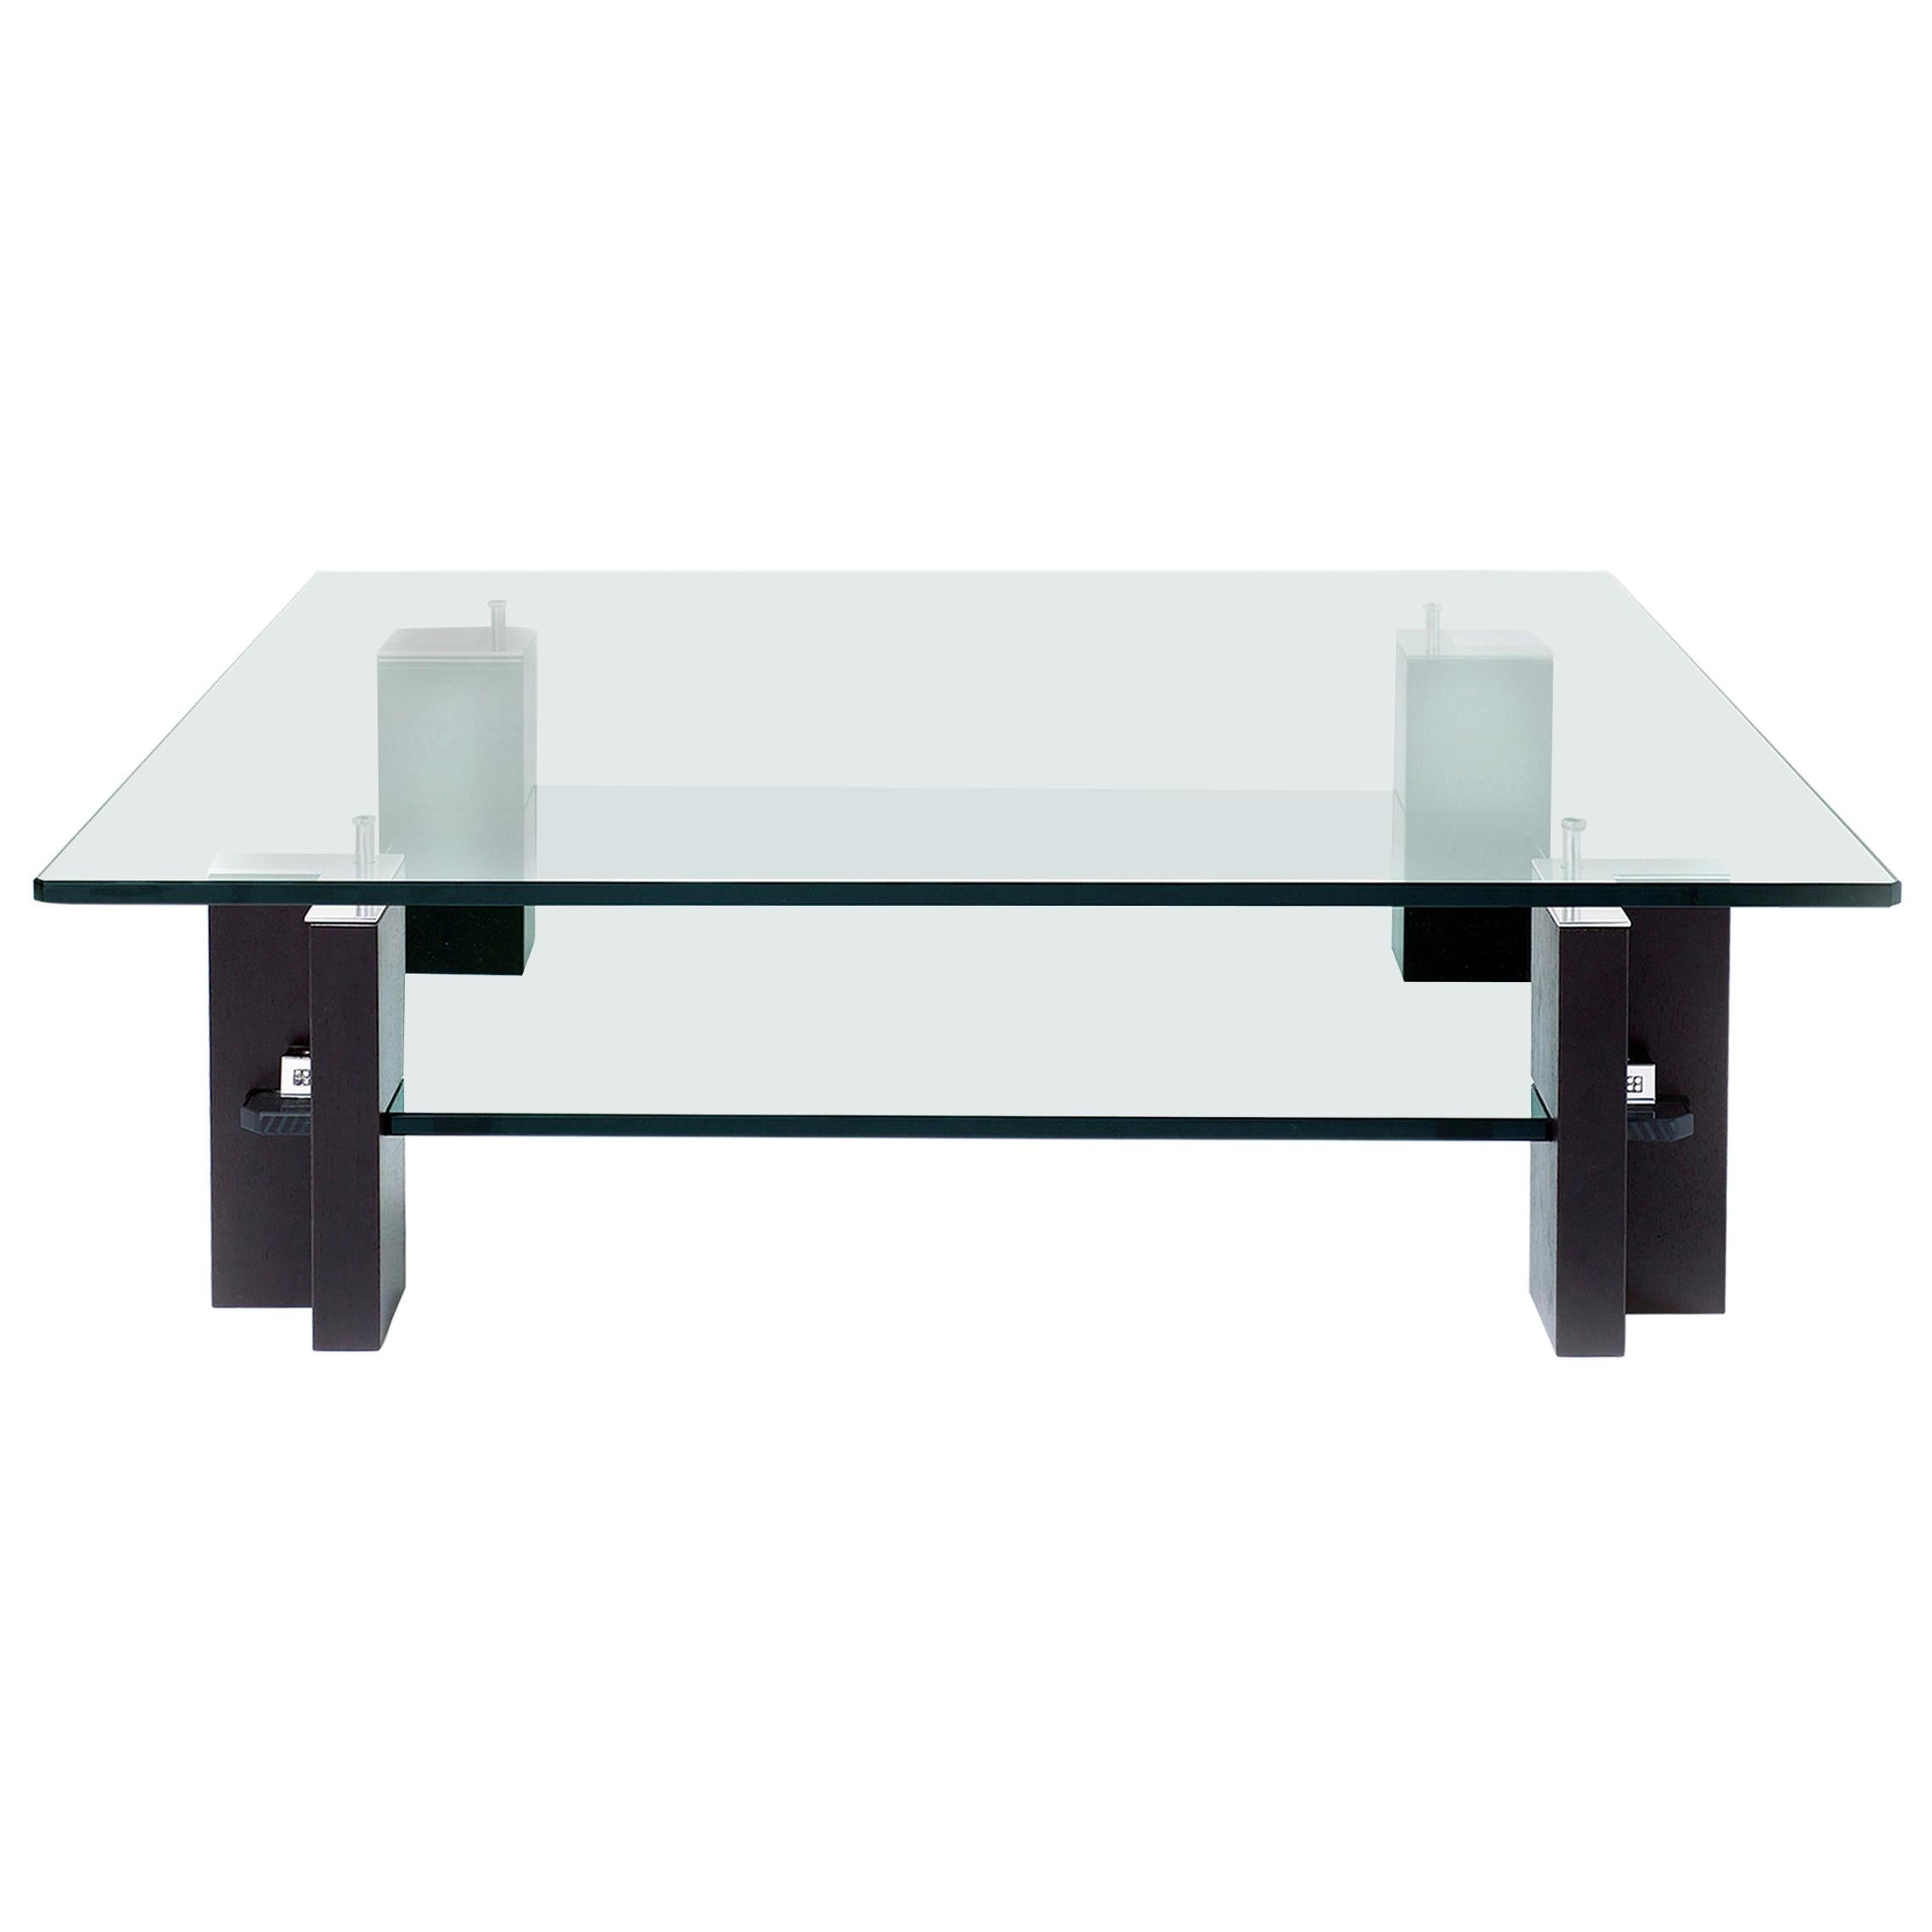 Peter Ghyczy Coffee Table Pioneer 'T57D' Aluminium / Oak wenge / Clear Glass